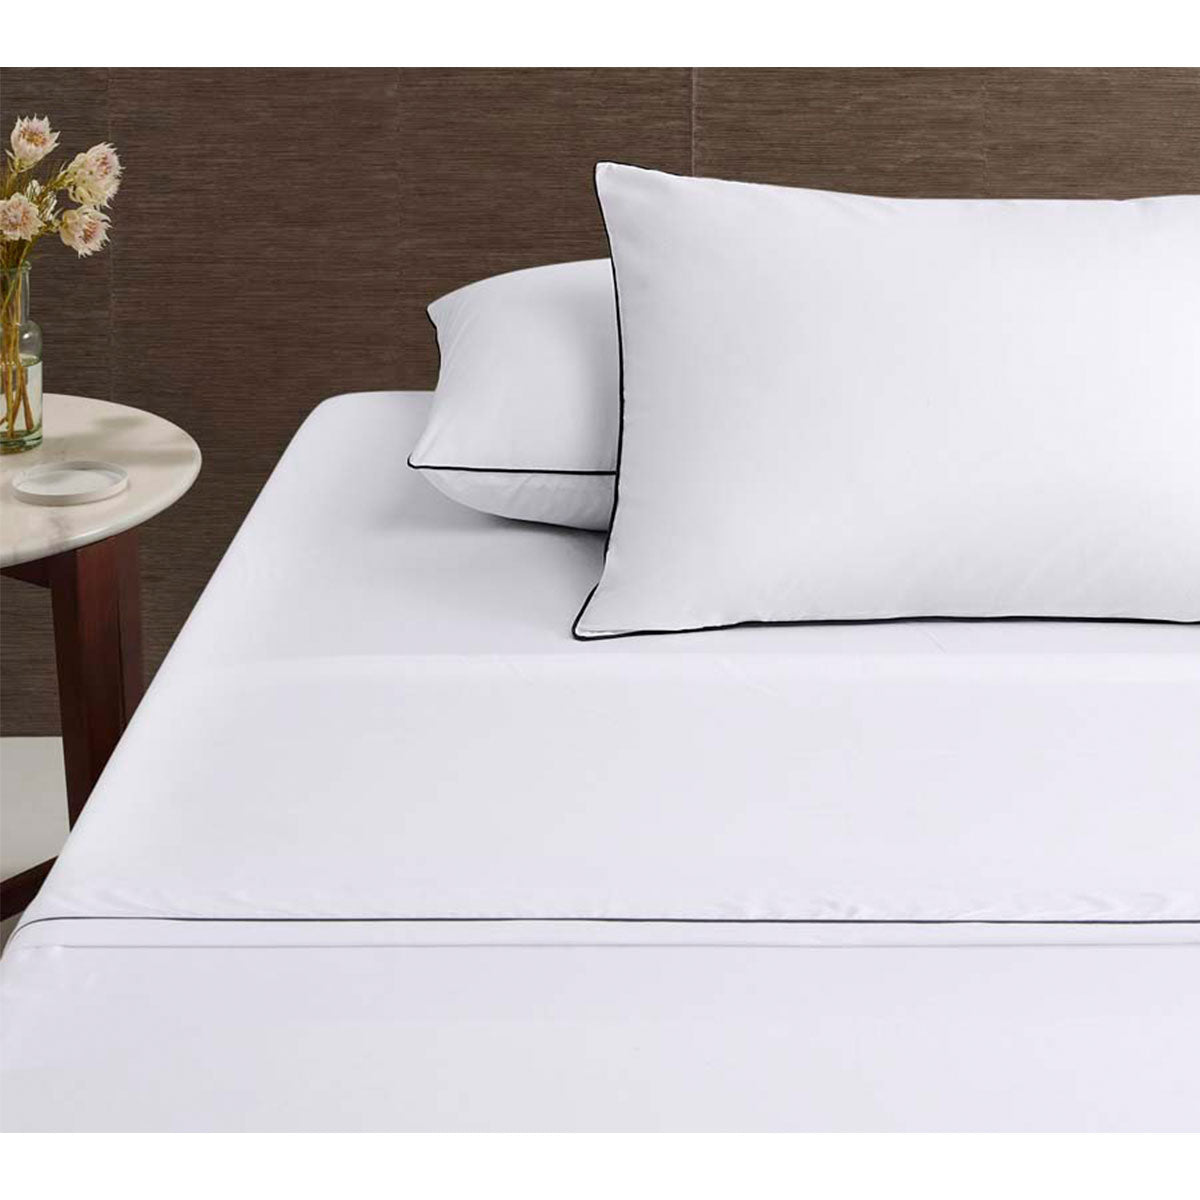 Accessorize White/Black Piped Hotel Deluxe Cotton Sheet Set - King | Premium Sheets